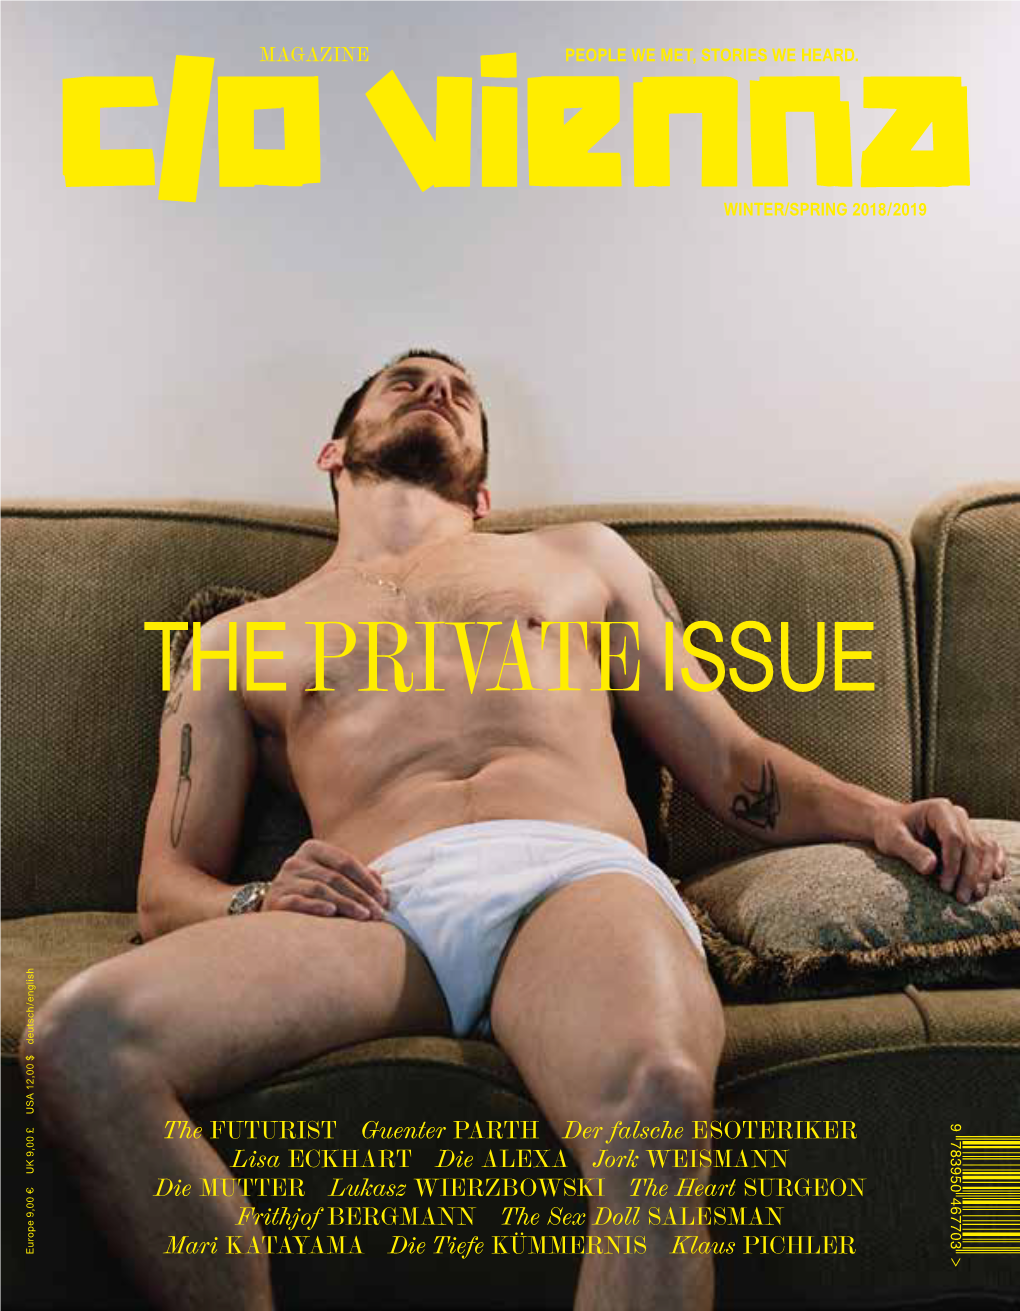 The Private Issue